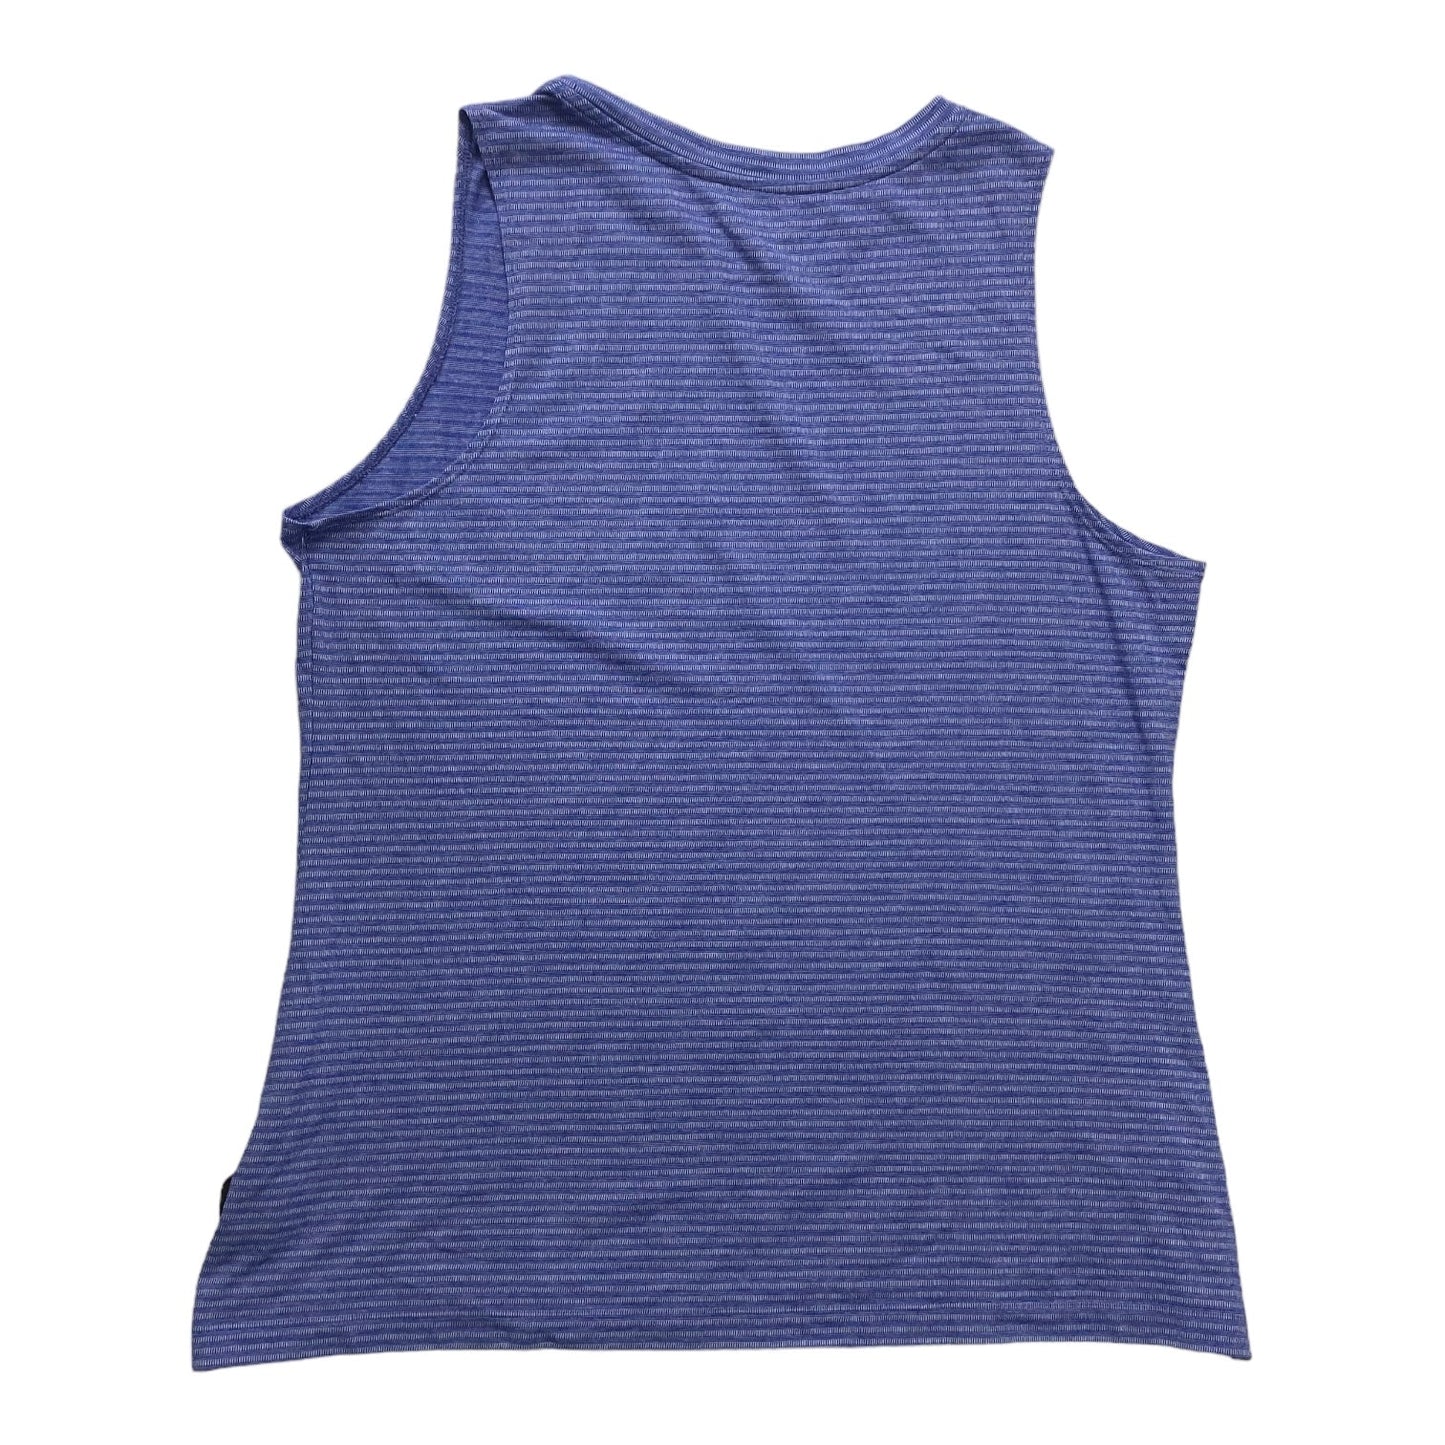 Blue Athletic Tank Top Athletic Works, Size 2x